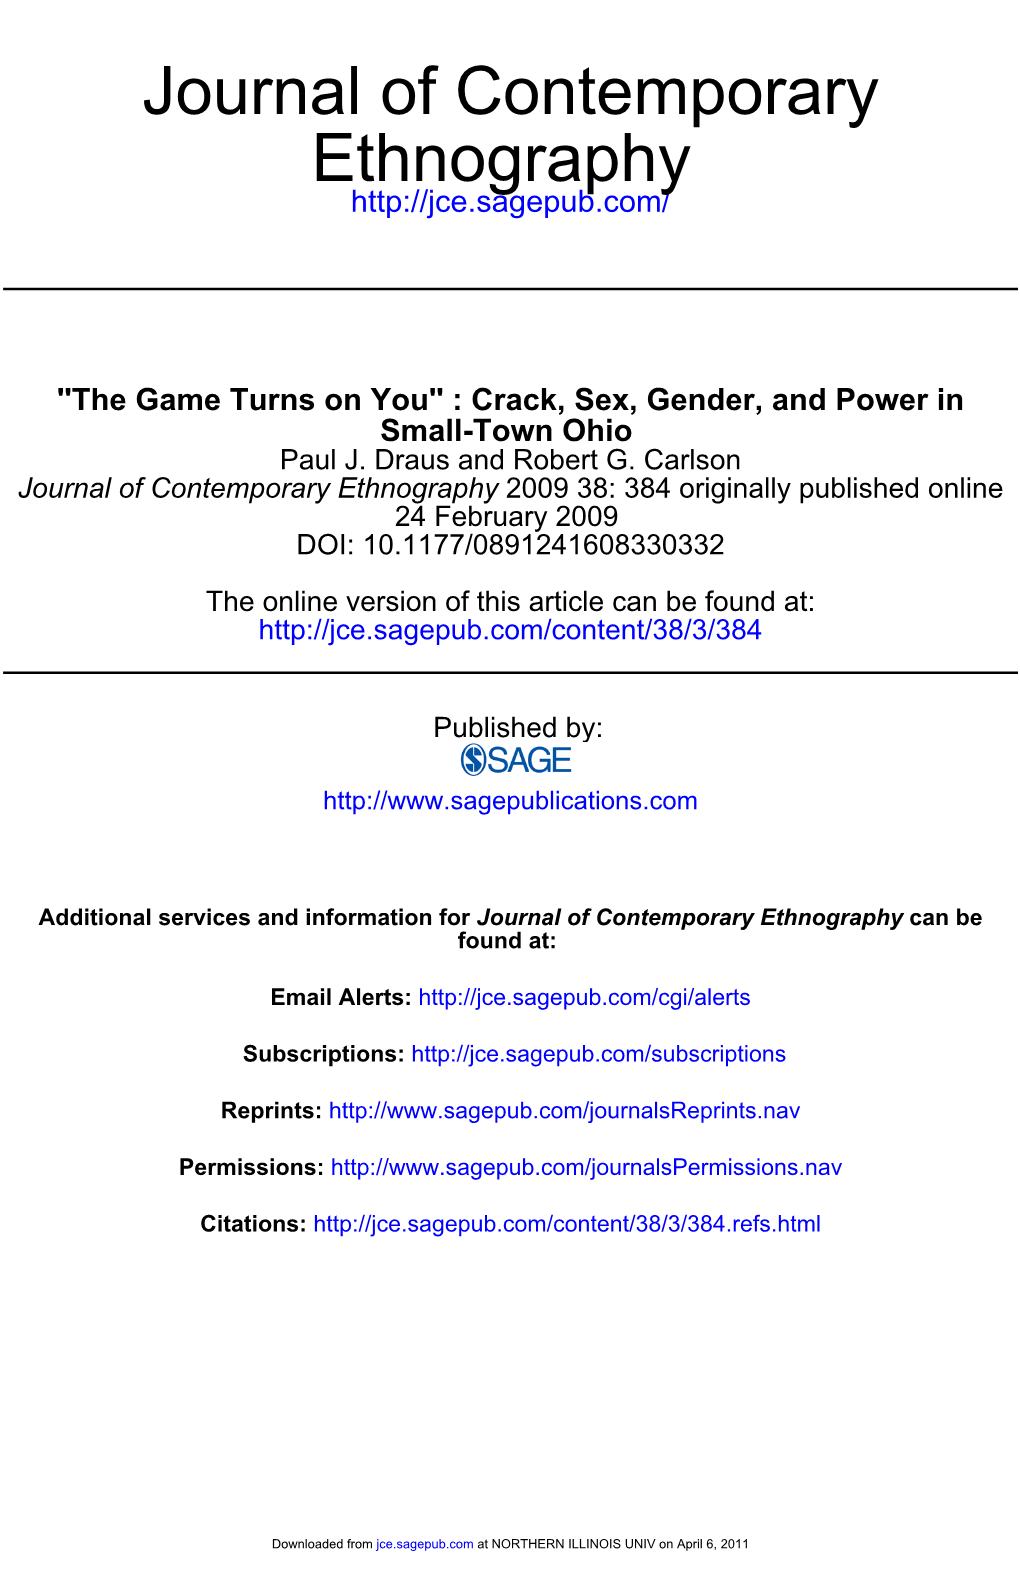 Ethnography Journal of Contemporary